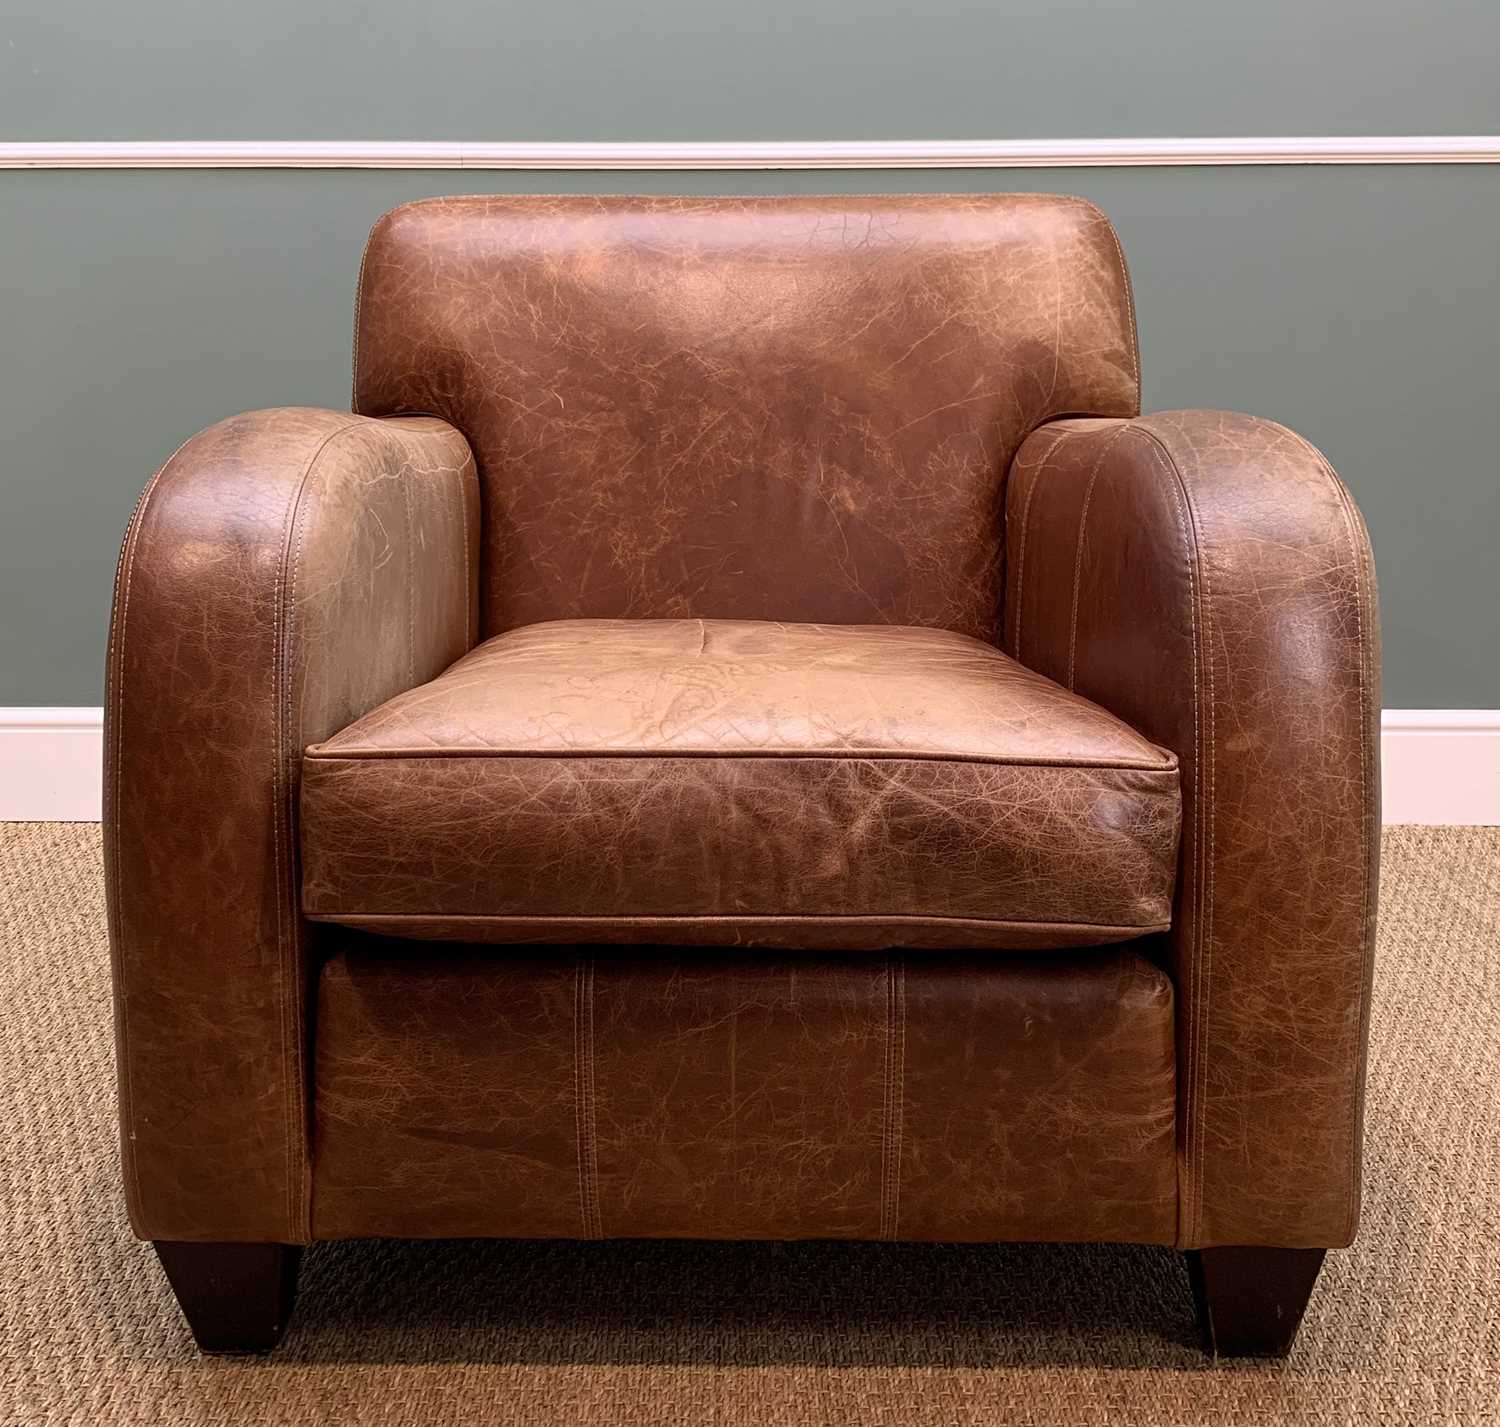 LAURA ASHLEY SEATING FURNITURE, comprising ART DECO STYLE LEATHER ARMCHAIR, loose cushion, double - Image 13 of 16